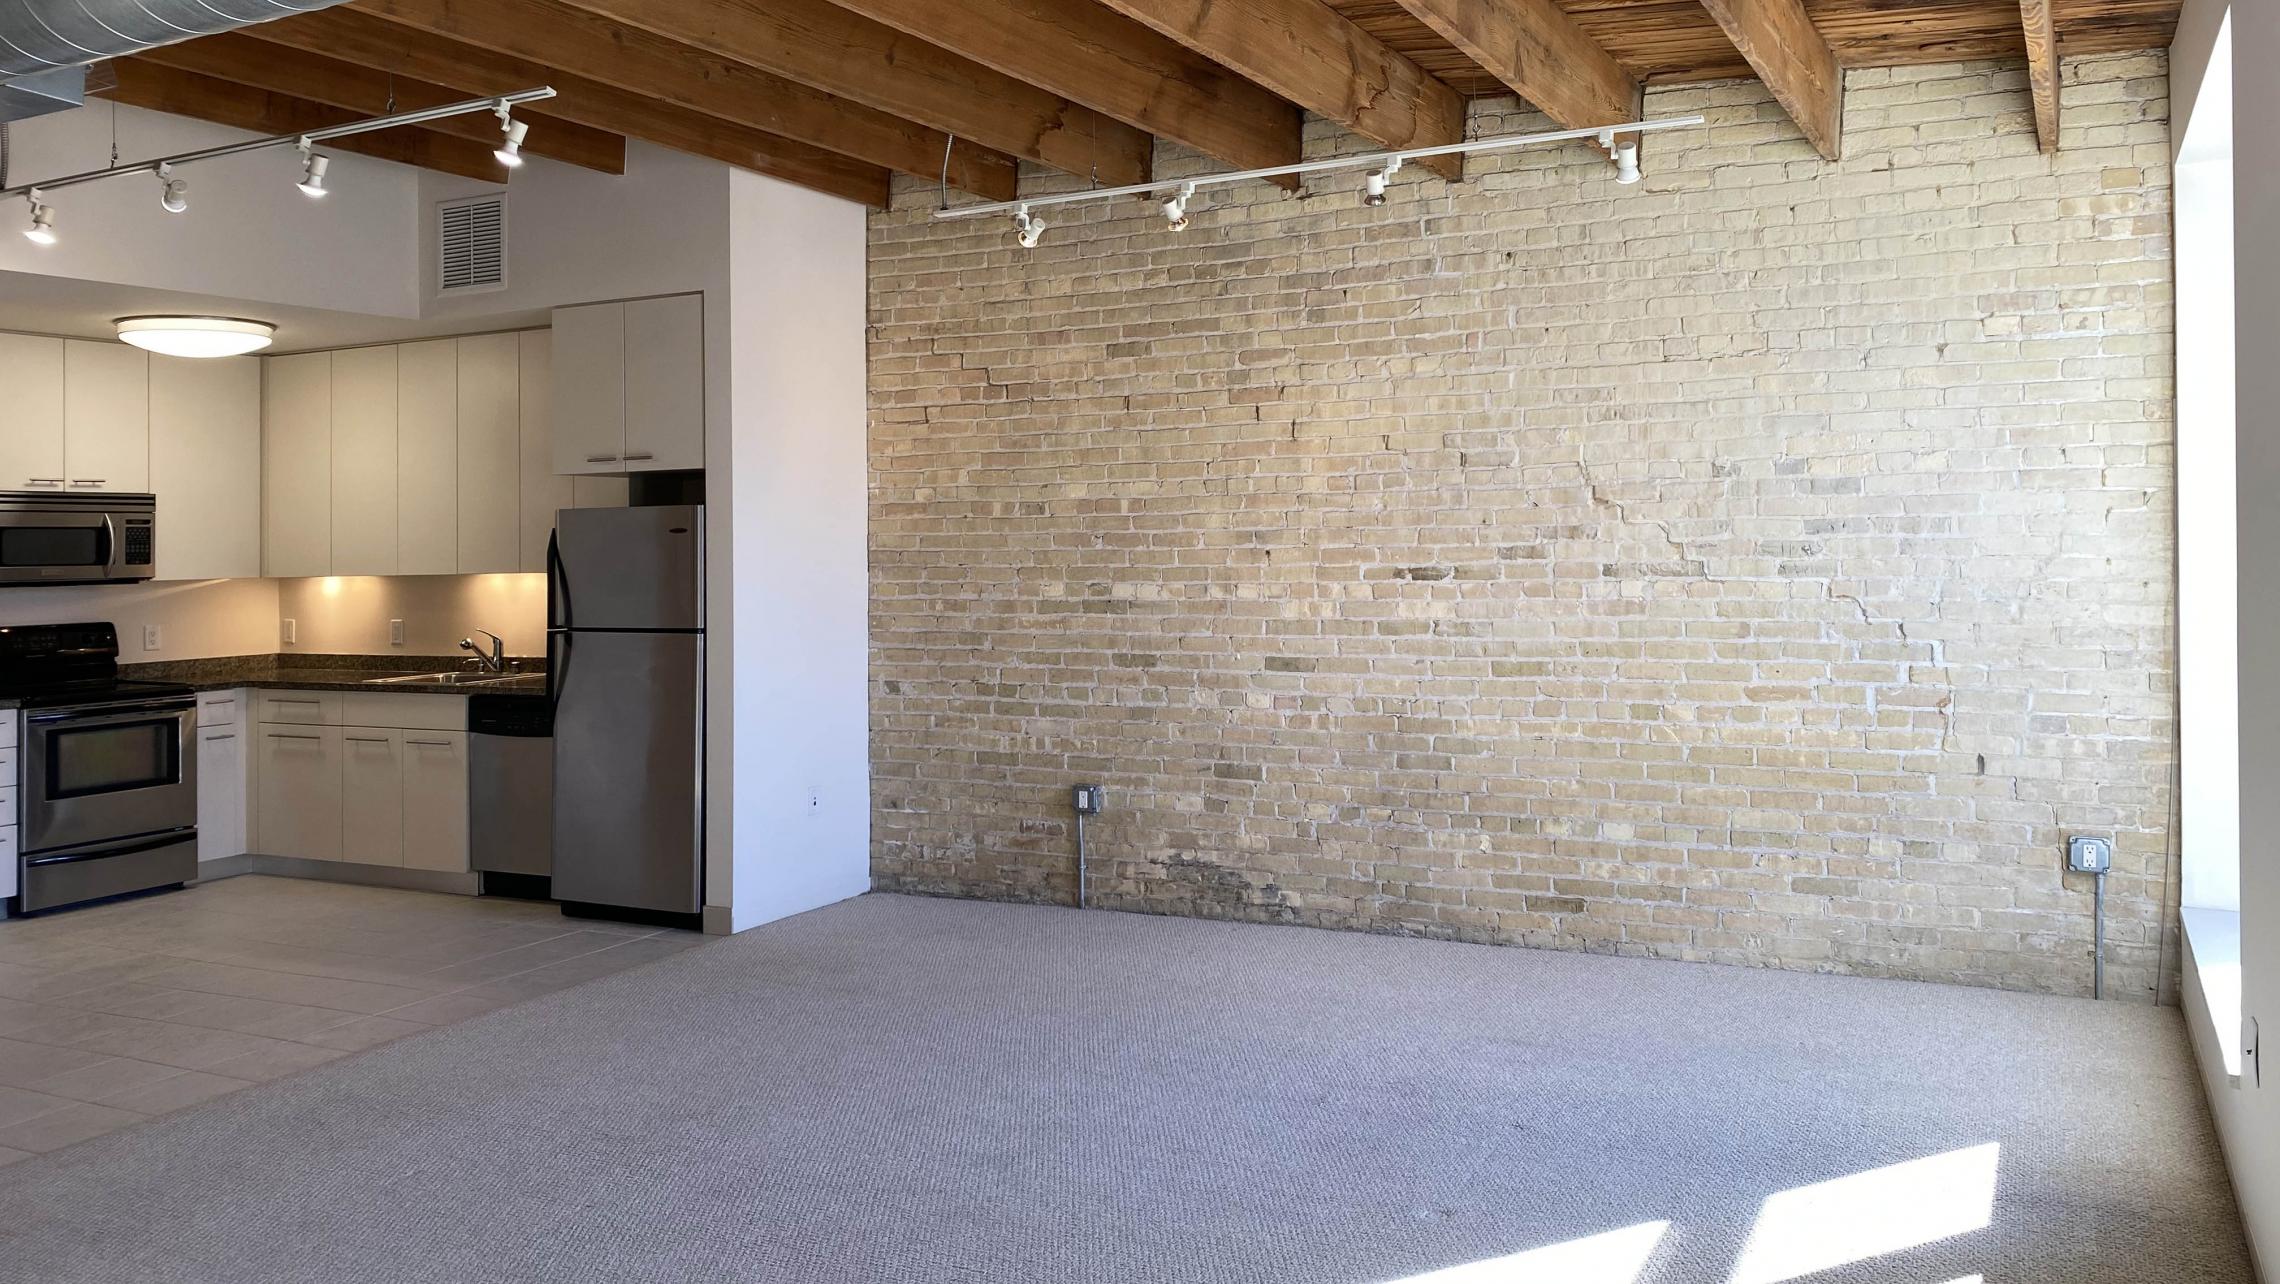 Tobacco-Lofts-at-The-Yards-Apartment-W206-Studio-Bathrom-Kitchen-Balcony-Historic-Exposed-Brick-Timber-Beams-Unique-Design-Cats-High-Ceiling-Balcony-Downtown-Madison-Fitness-Lounge-Courtyard-Top-Floor-Vaulted-Ceiling